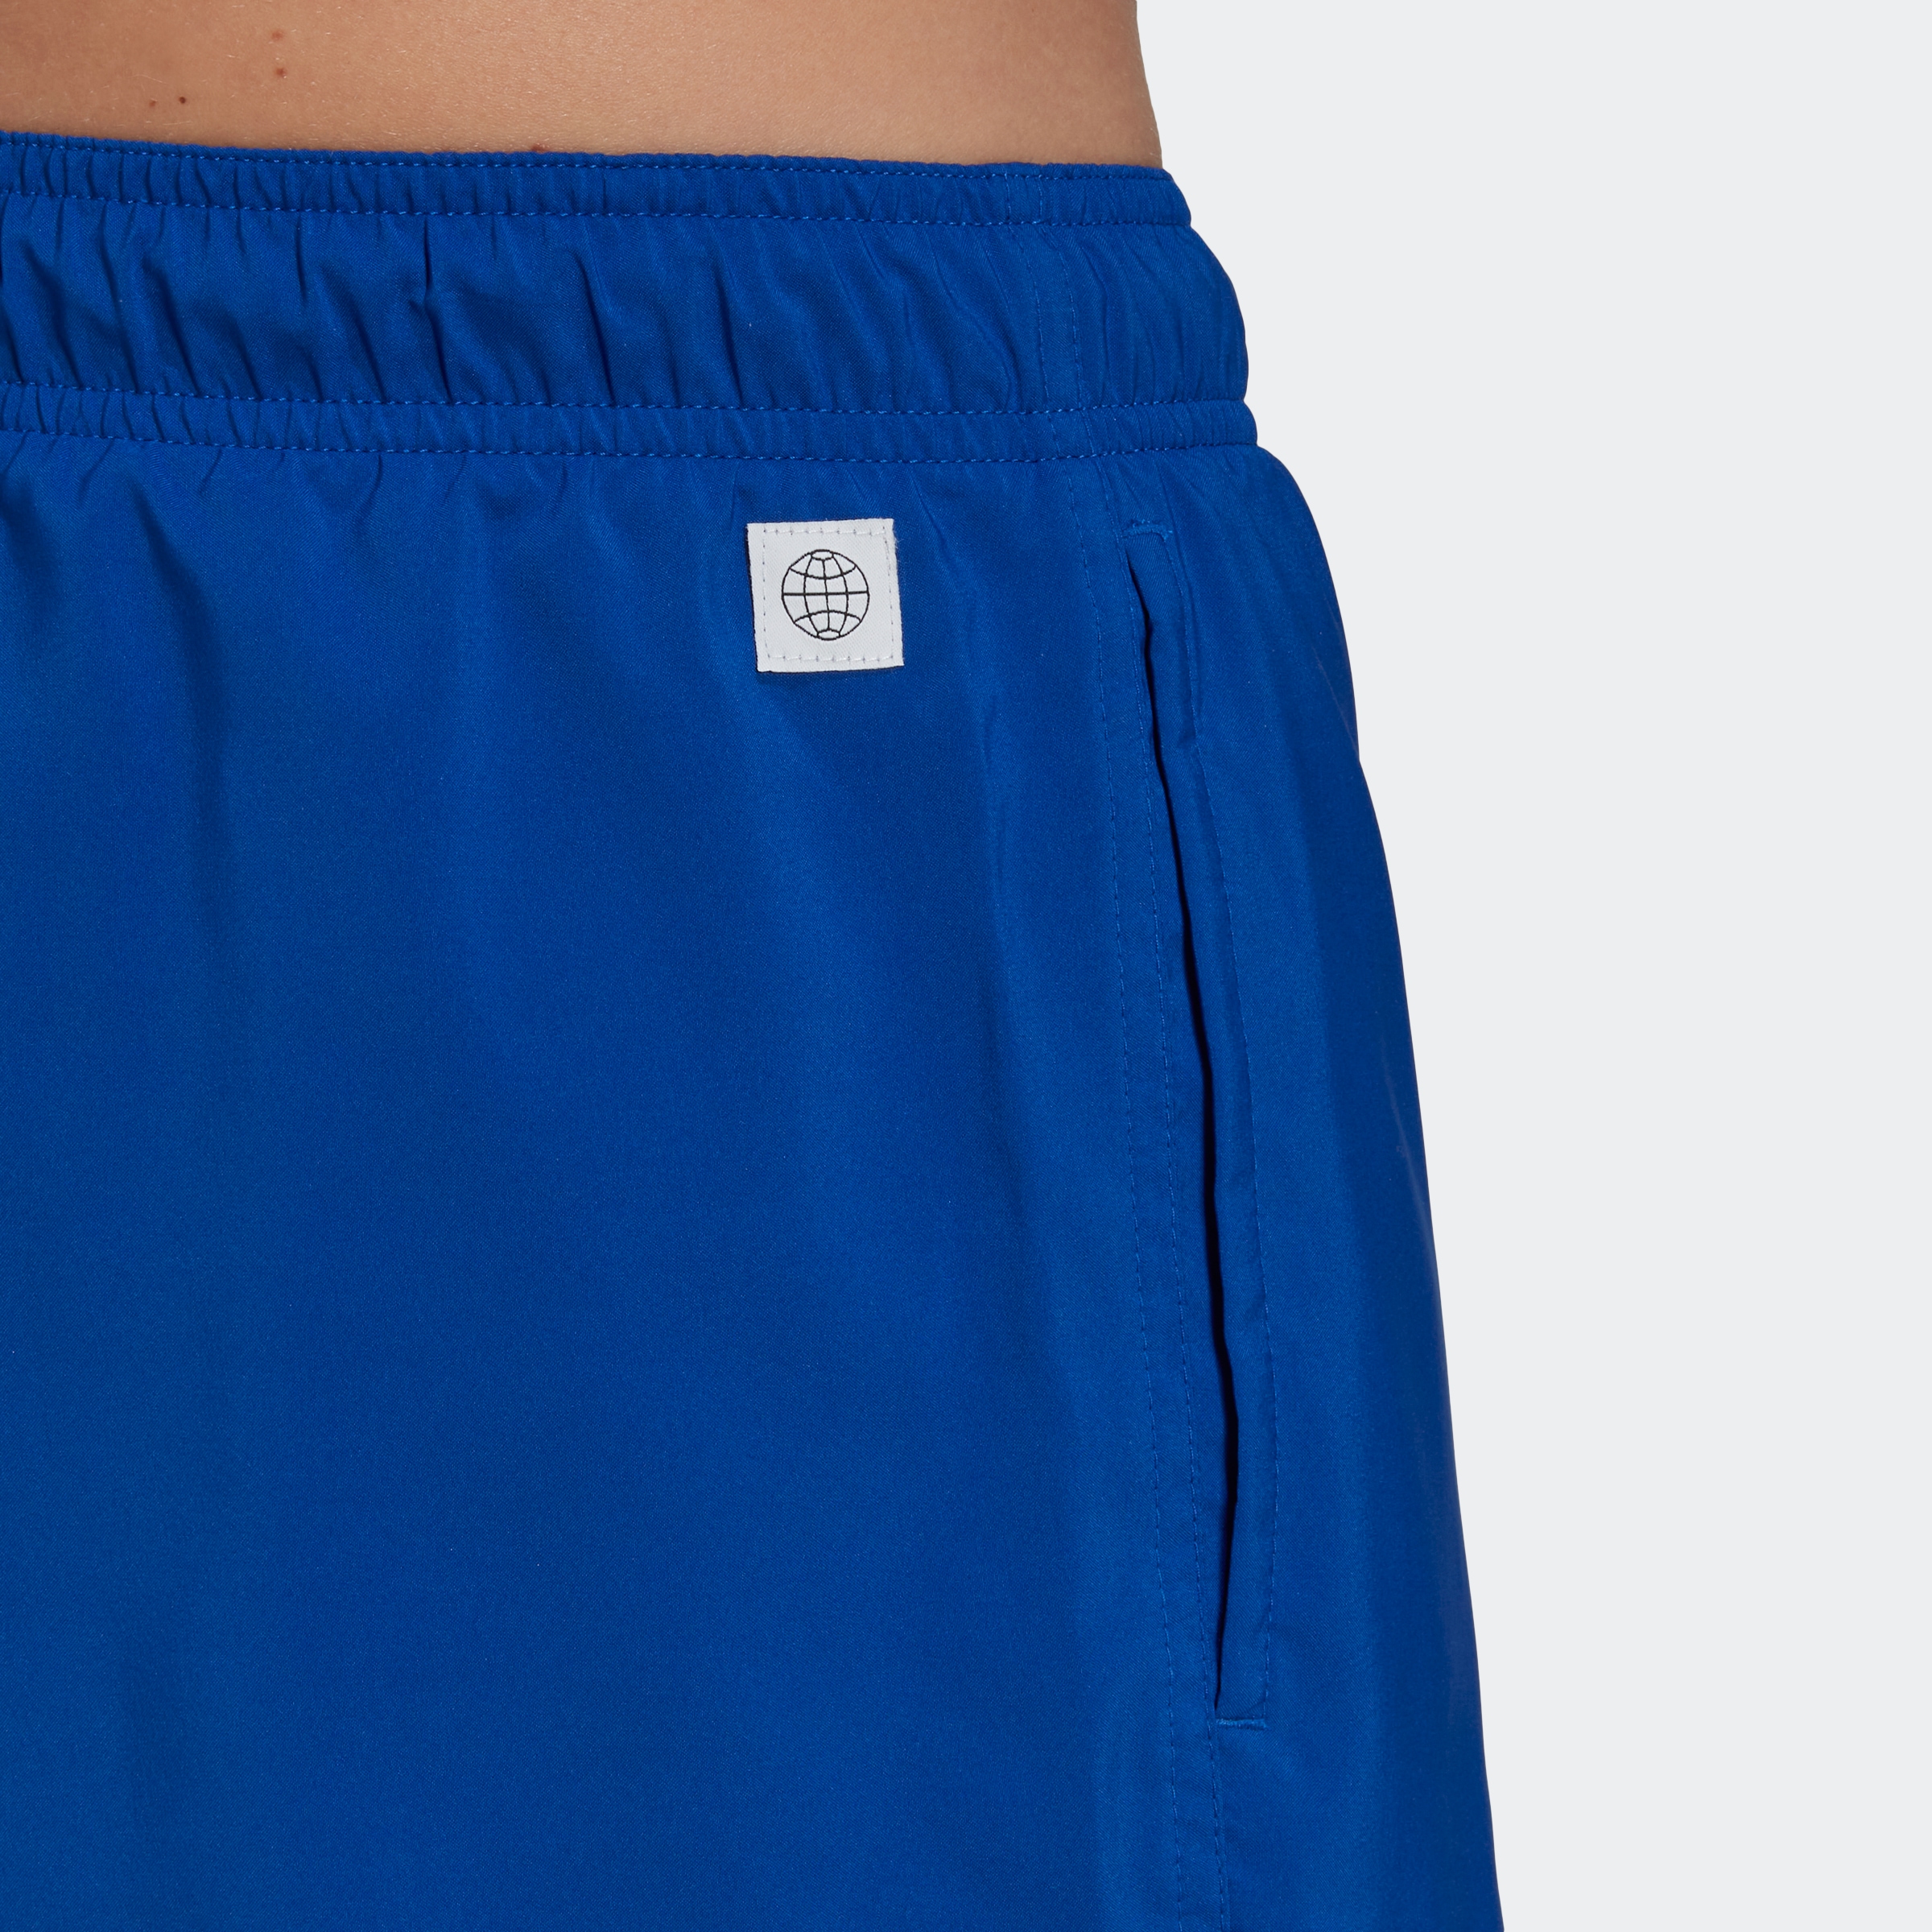 »SHORT LENGTH adidas St.) Performance Badehose (1 SOLID«, bei